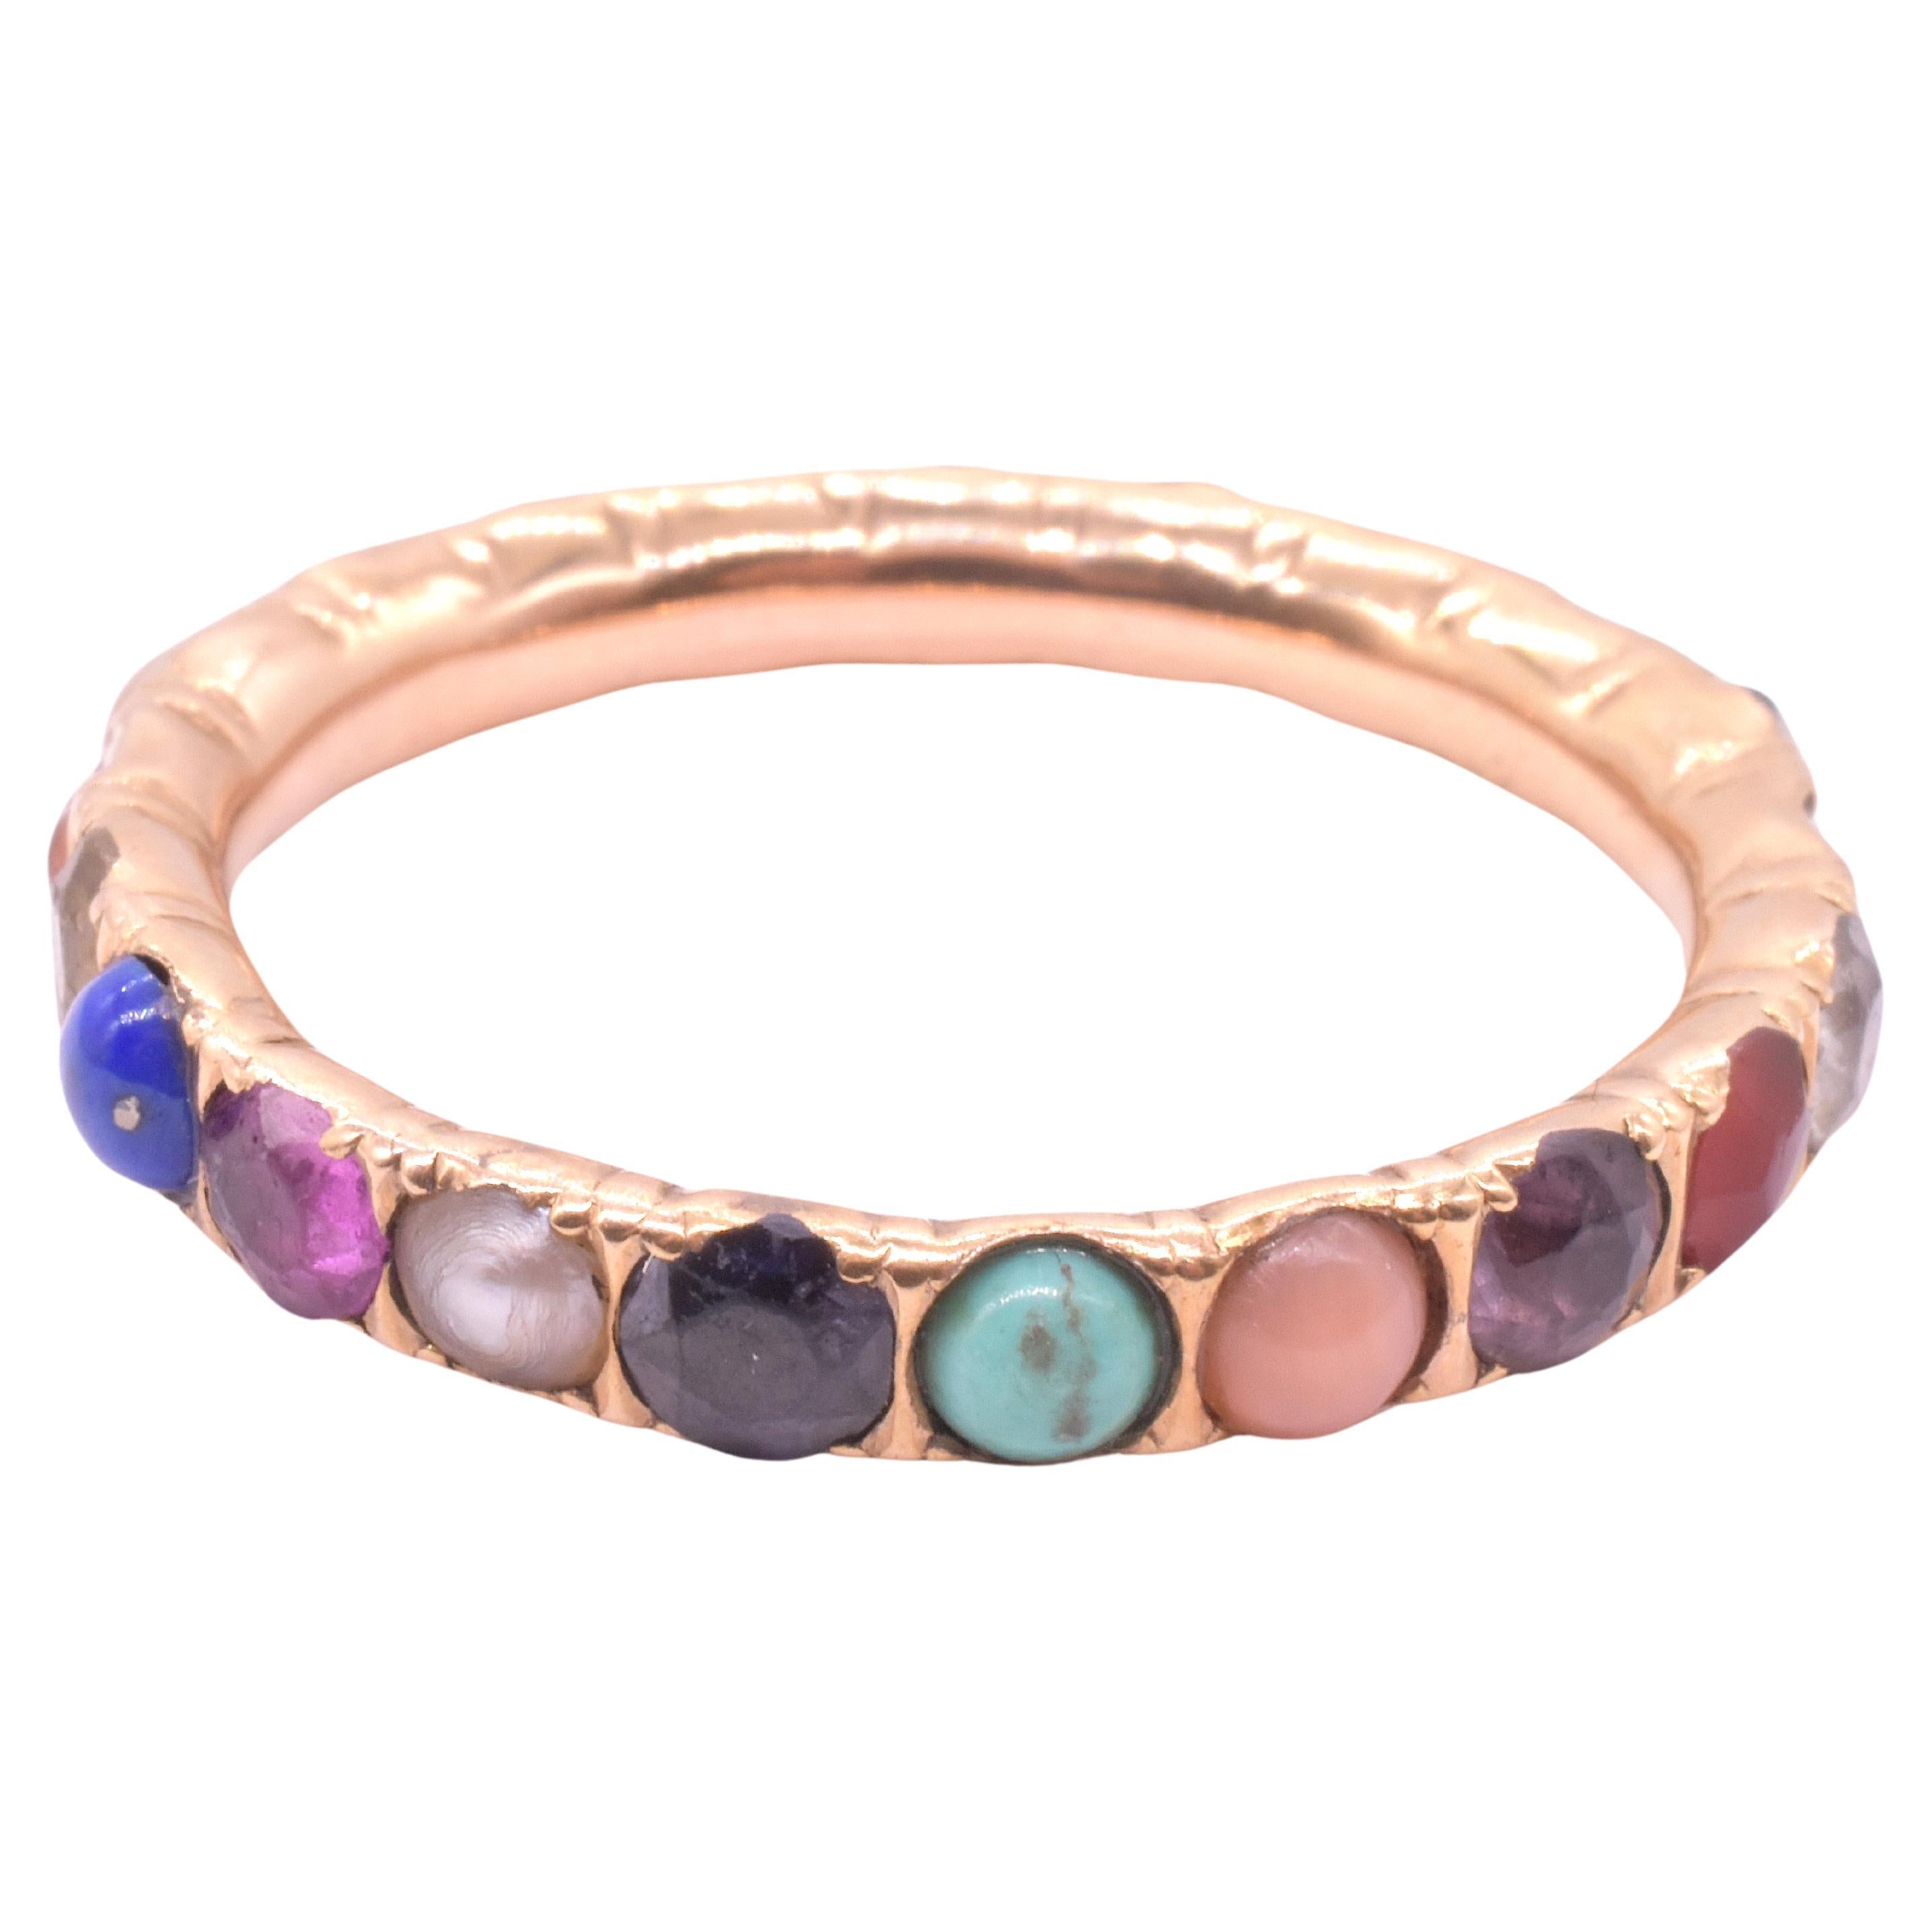 Late Georgian multi stone harlequin eternity band with individually carved stones bordered in gold which form a complete band, a series of circles within a circle. Rarely have we found an eternity band in a large size 13. 

The word 